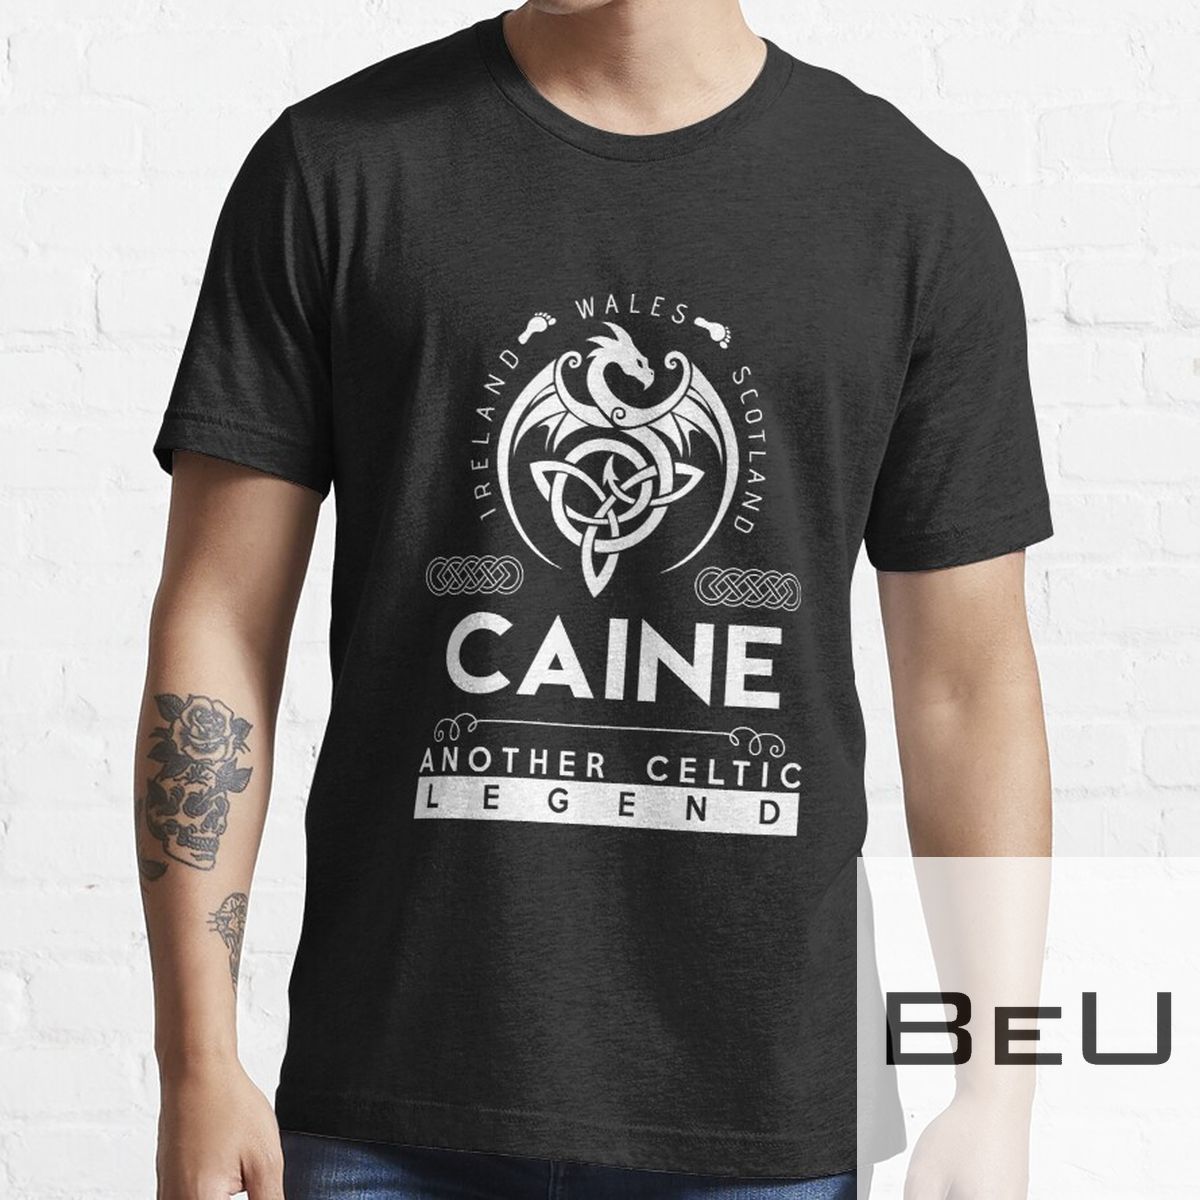 Caine Name T Shirt - Caine Another Celtic Legend Gift Item Tee T-shirt